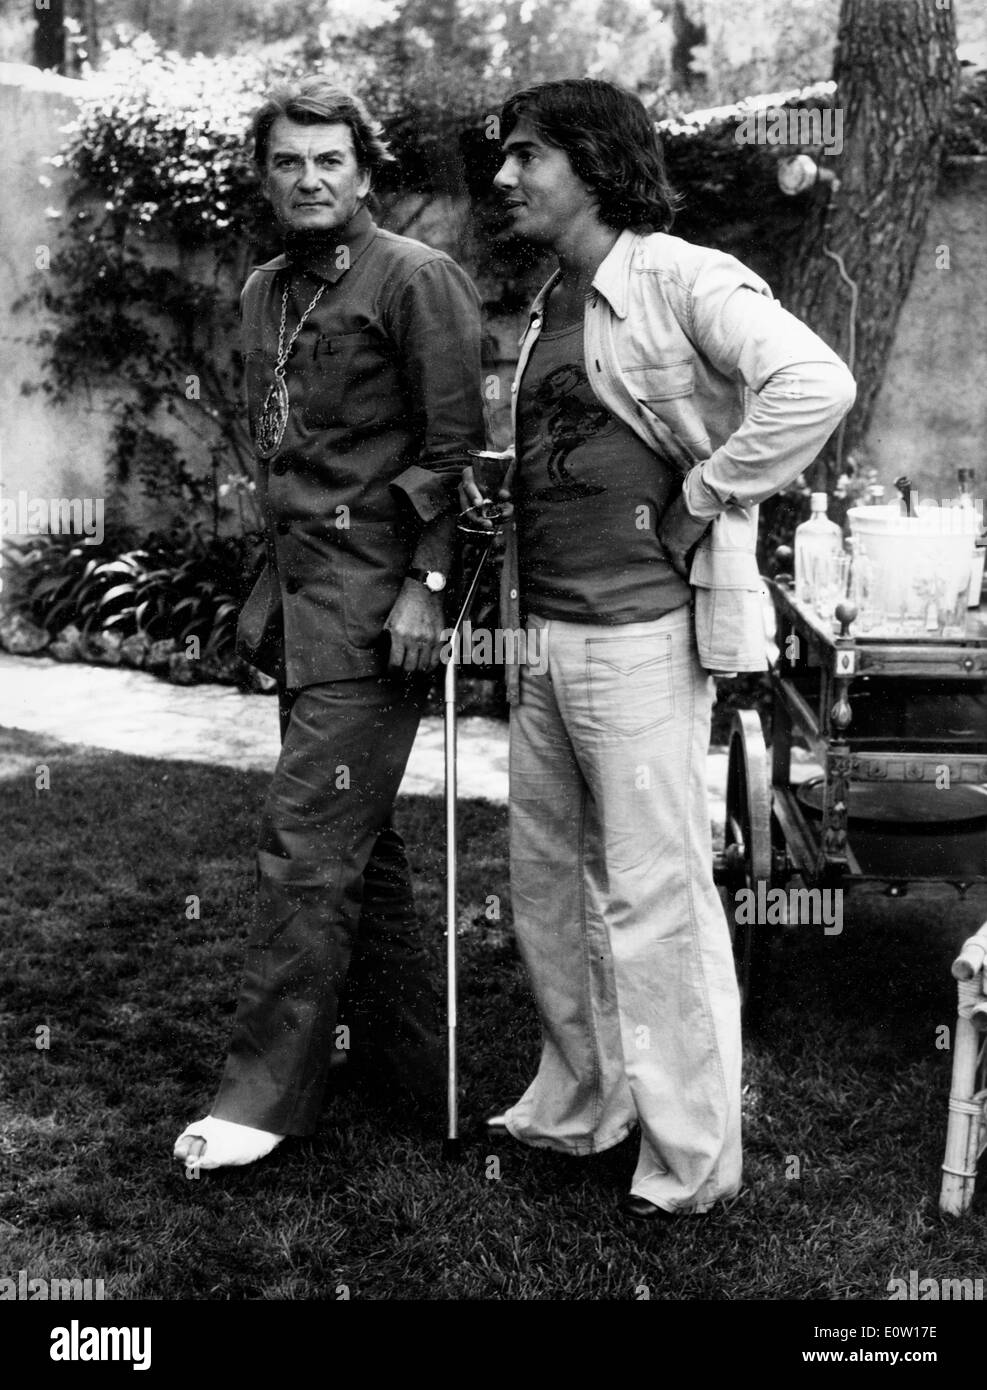 Actor Jean Marais standing with a friend while on crutches Stock Photo